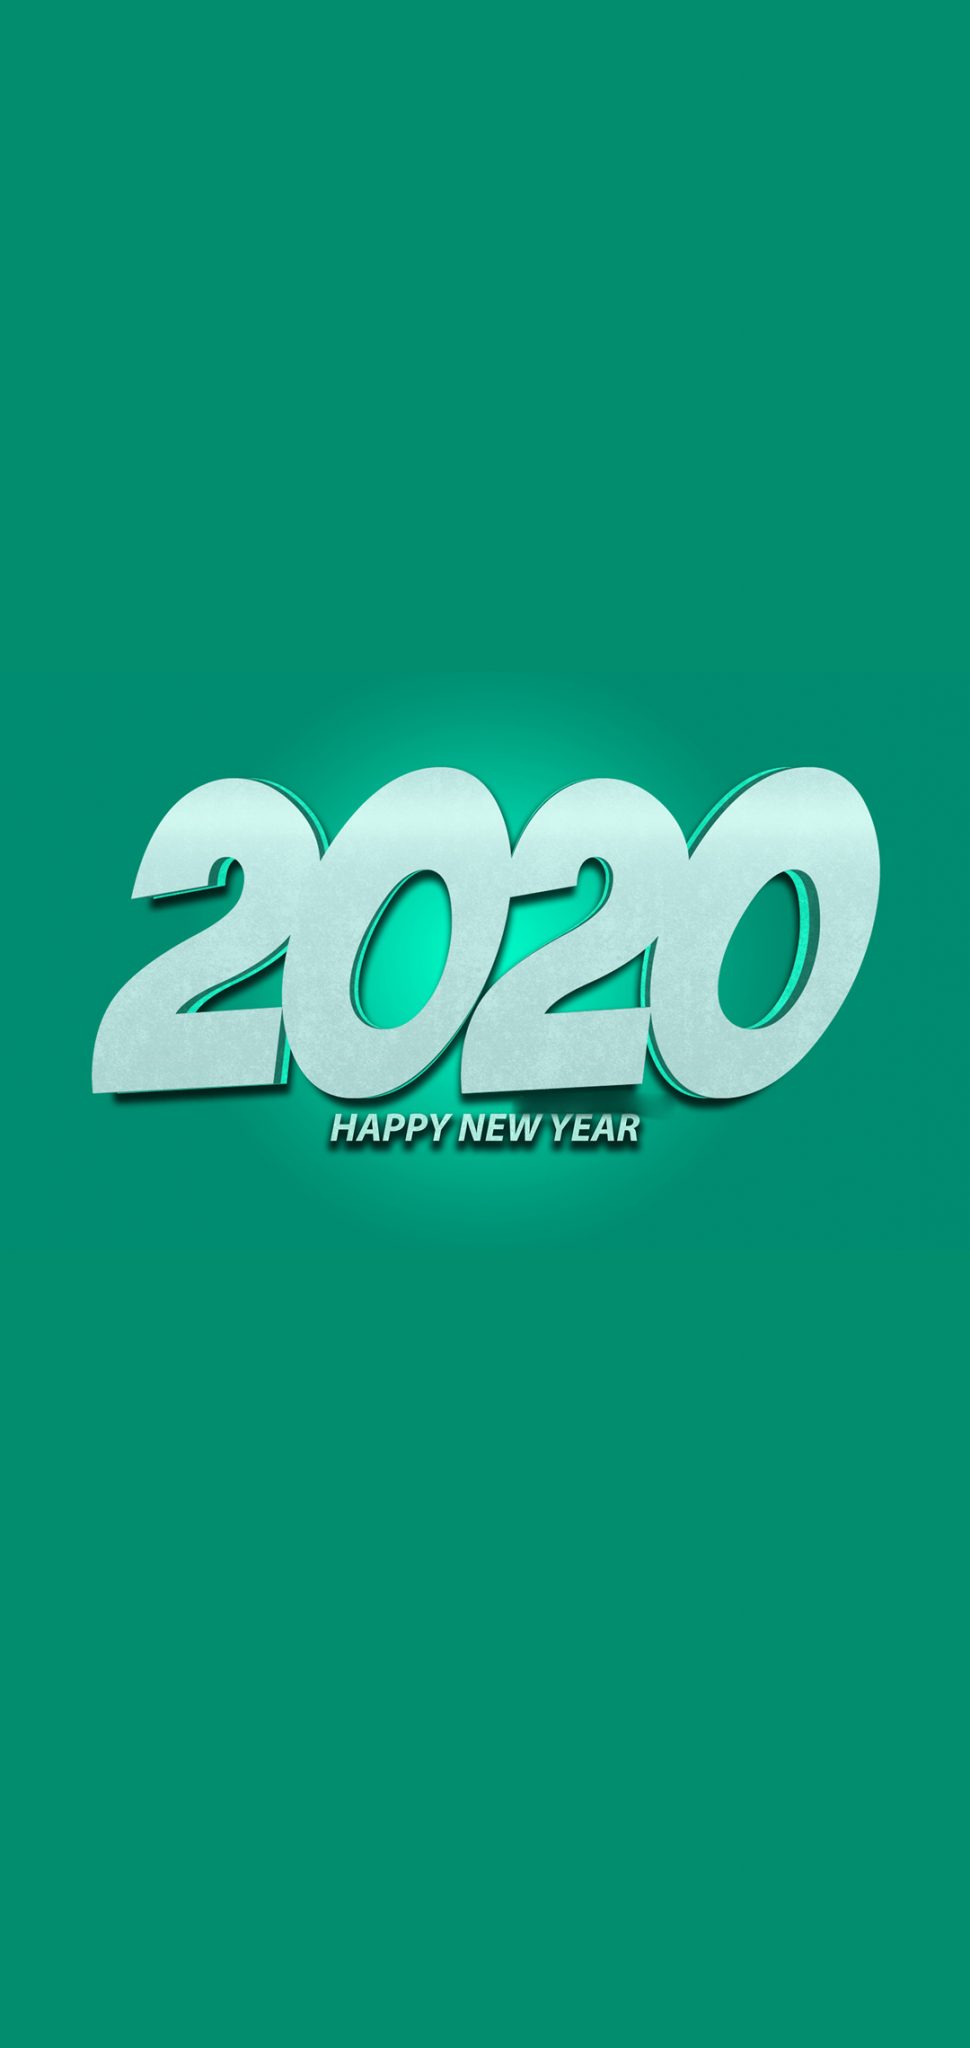 happy new year wallpaper,green,text,logo,font,turquoise